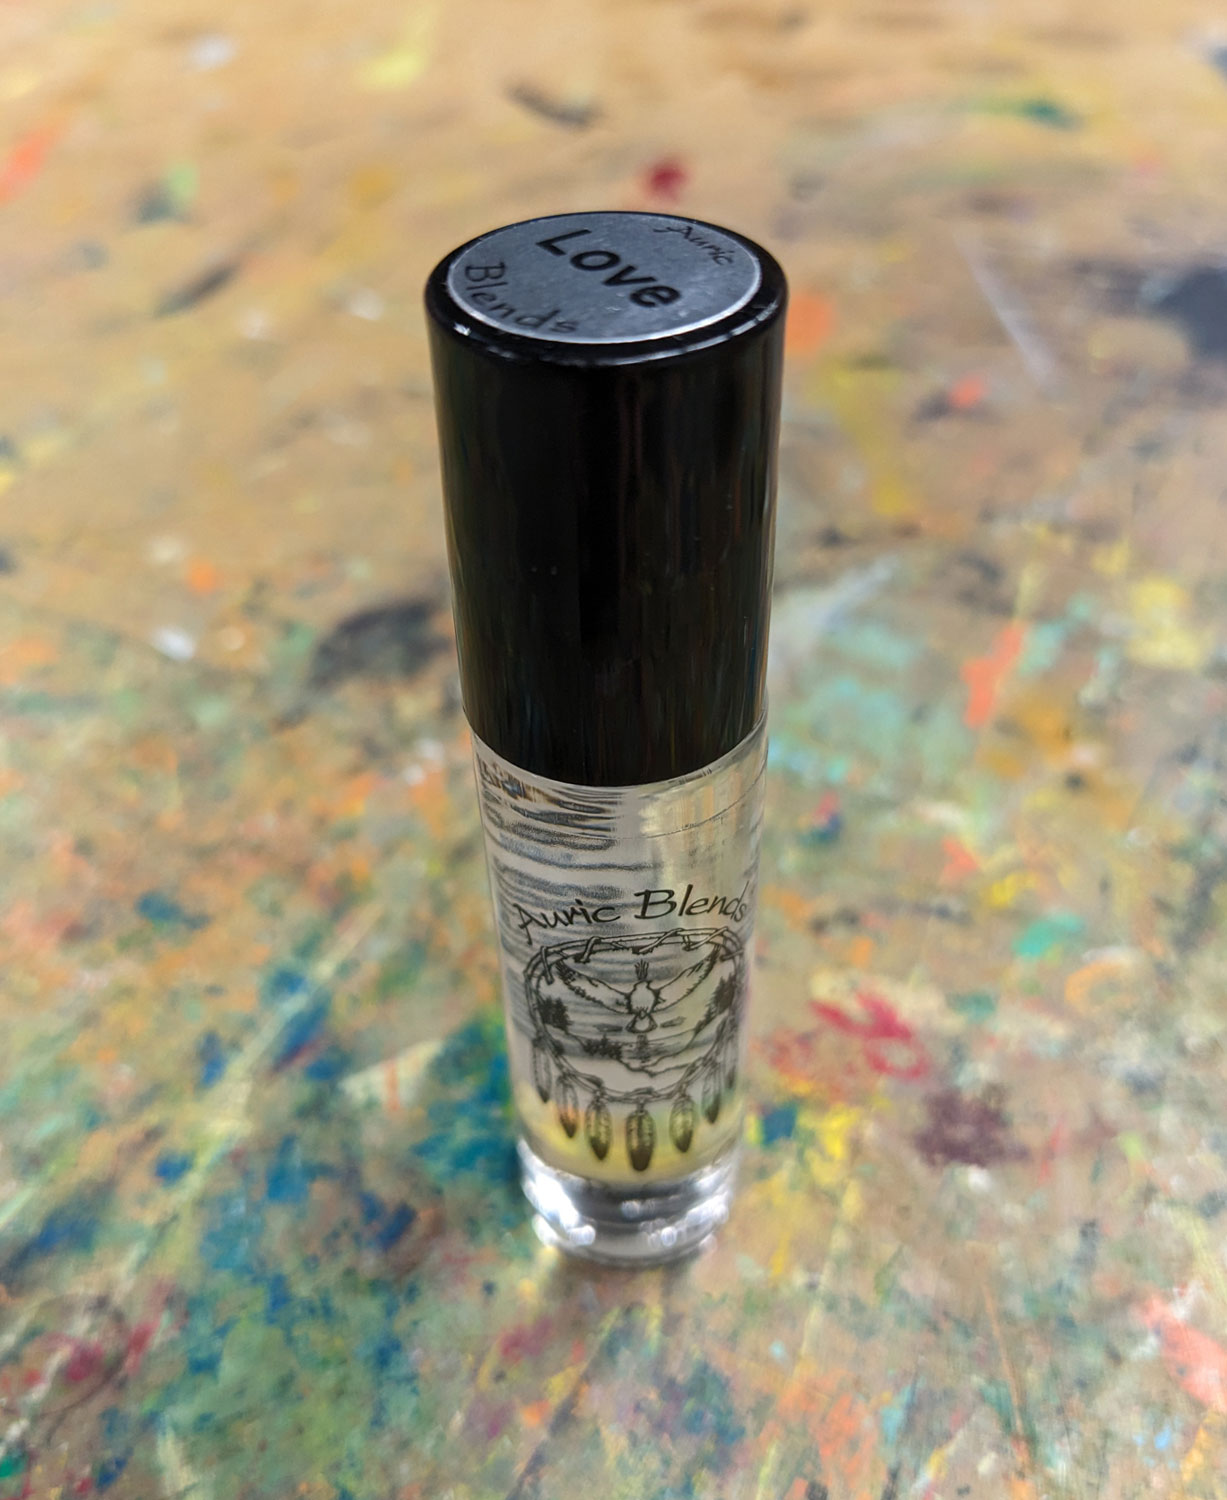 Auric Blends Perfume Oil - Love Scent